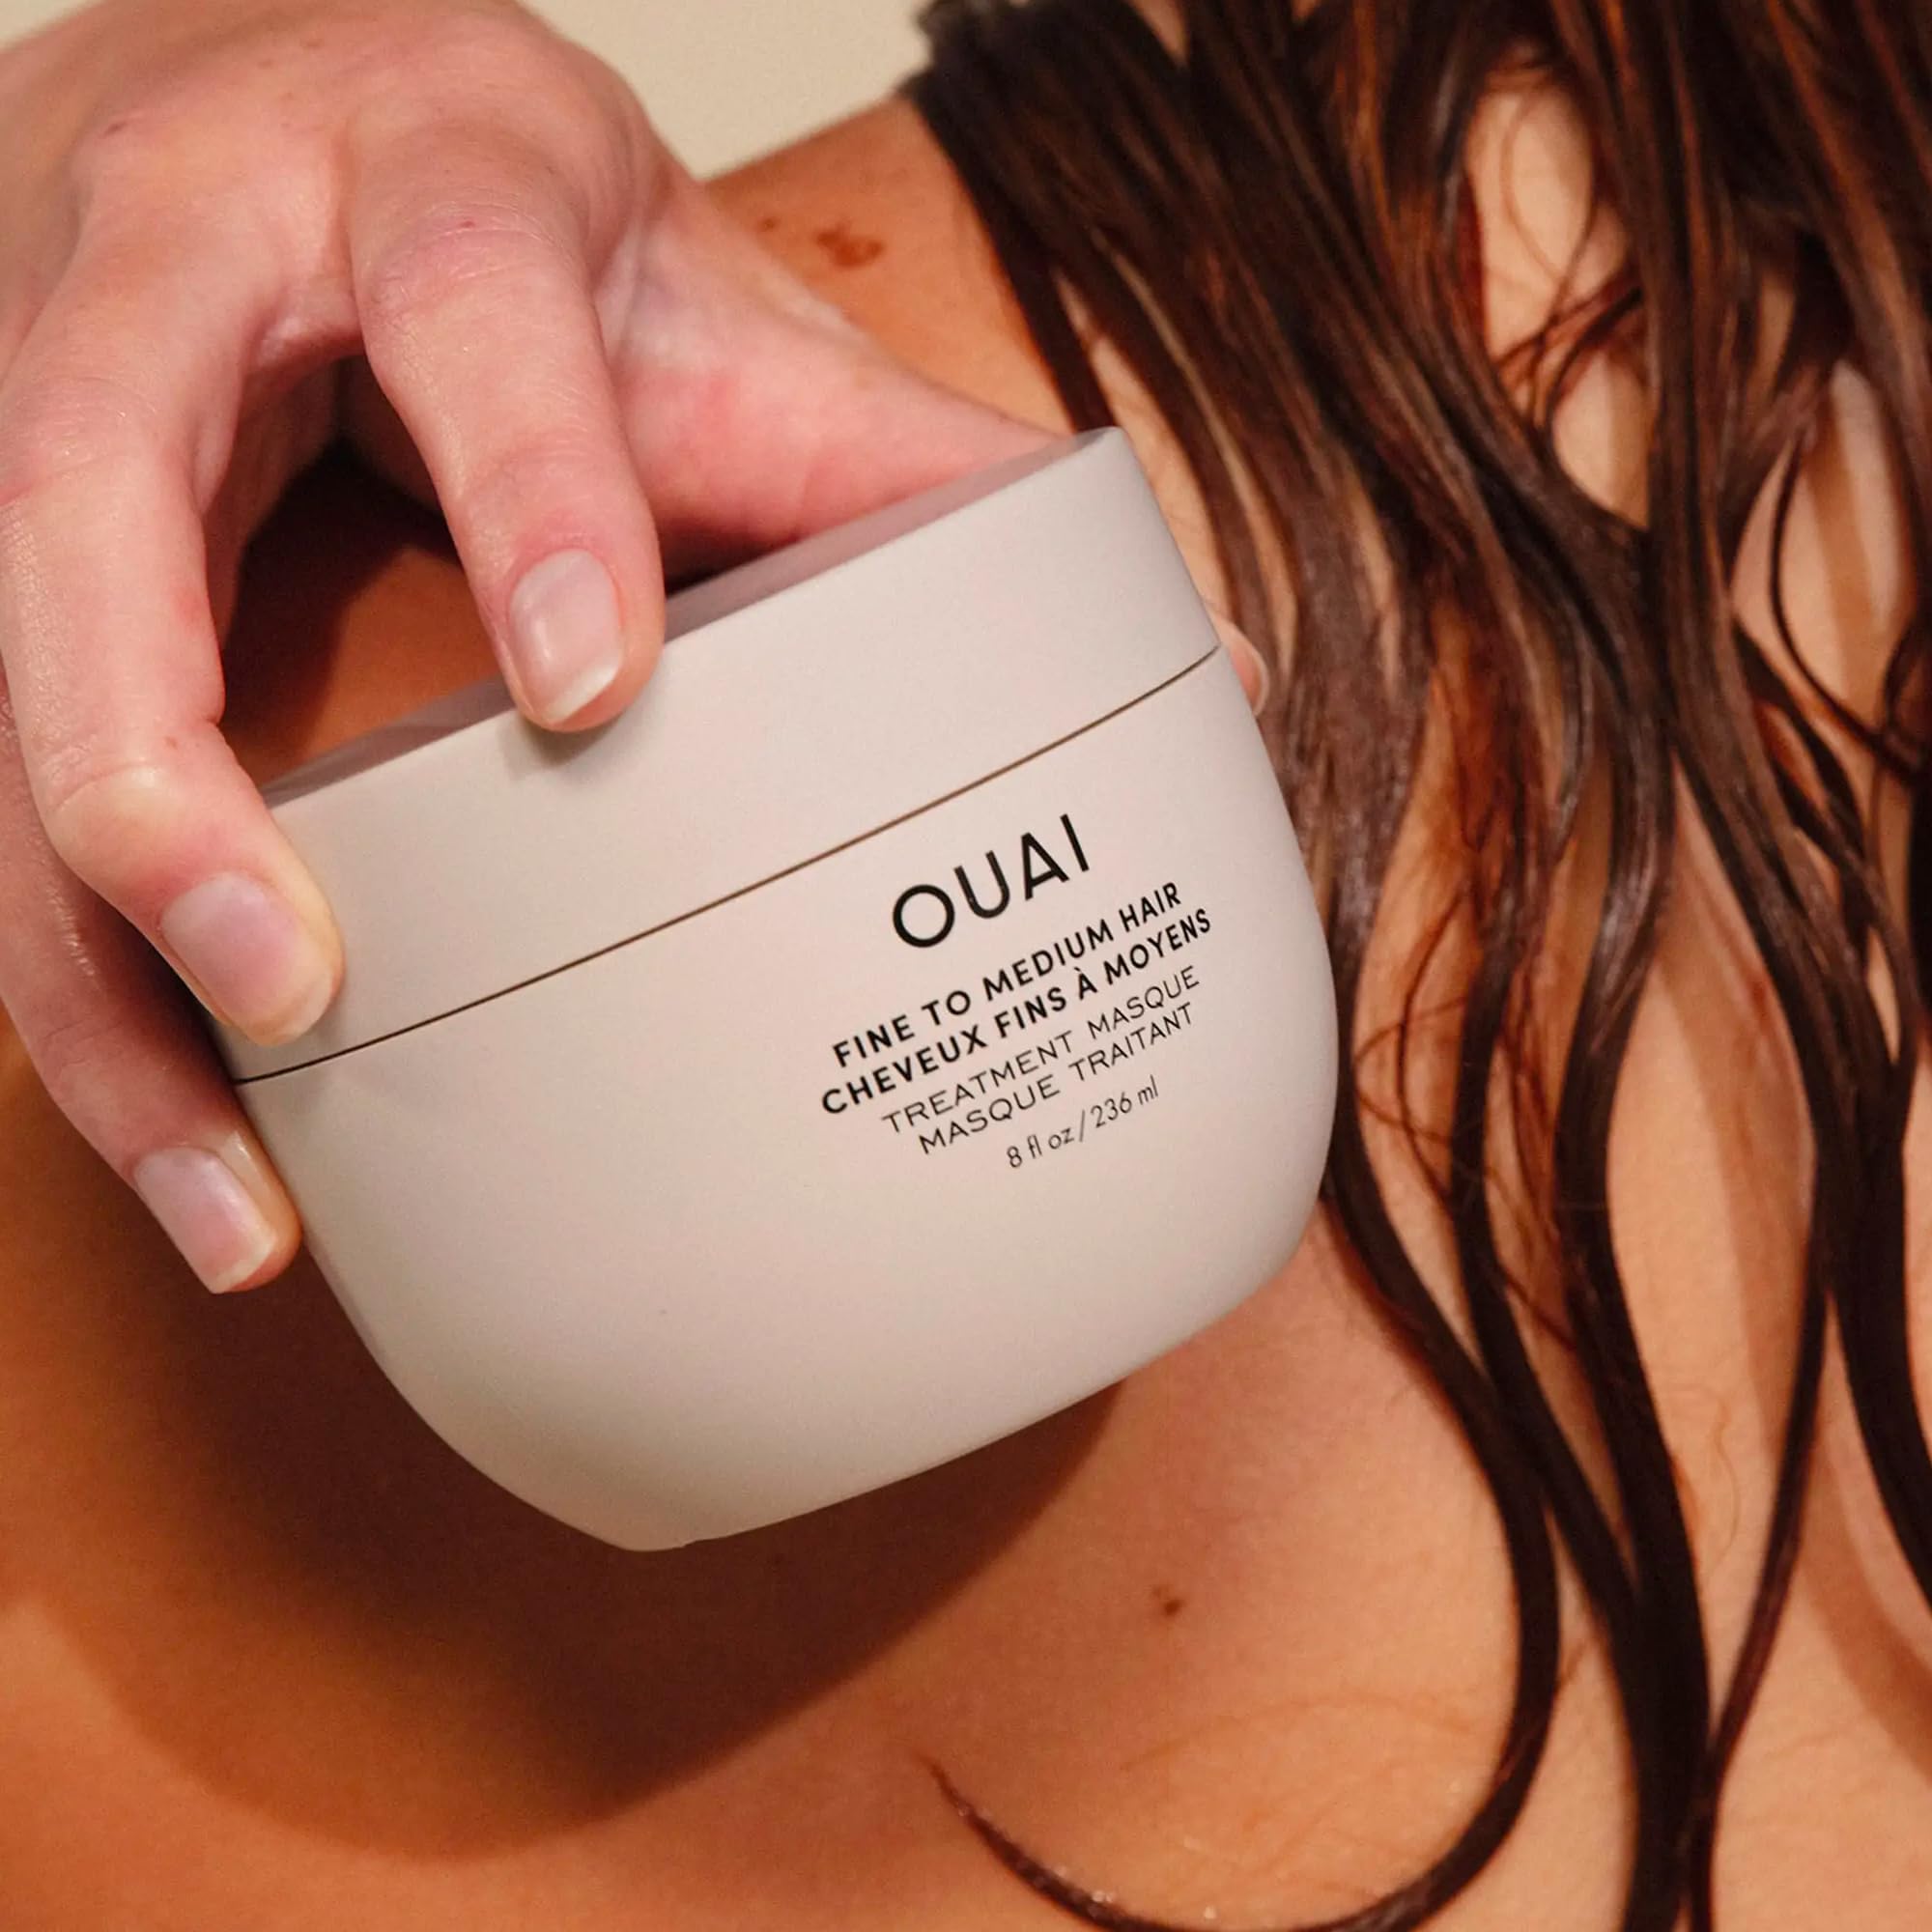 OUAI Fine to Medium Hair Treatment Masque - Repairs & Restores for Soft, Smooth & Strong Hair - Free of Parabens & Phthalates - 8 fl oz